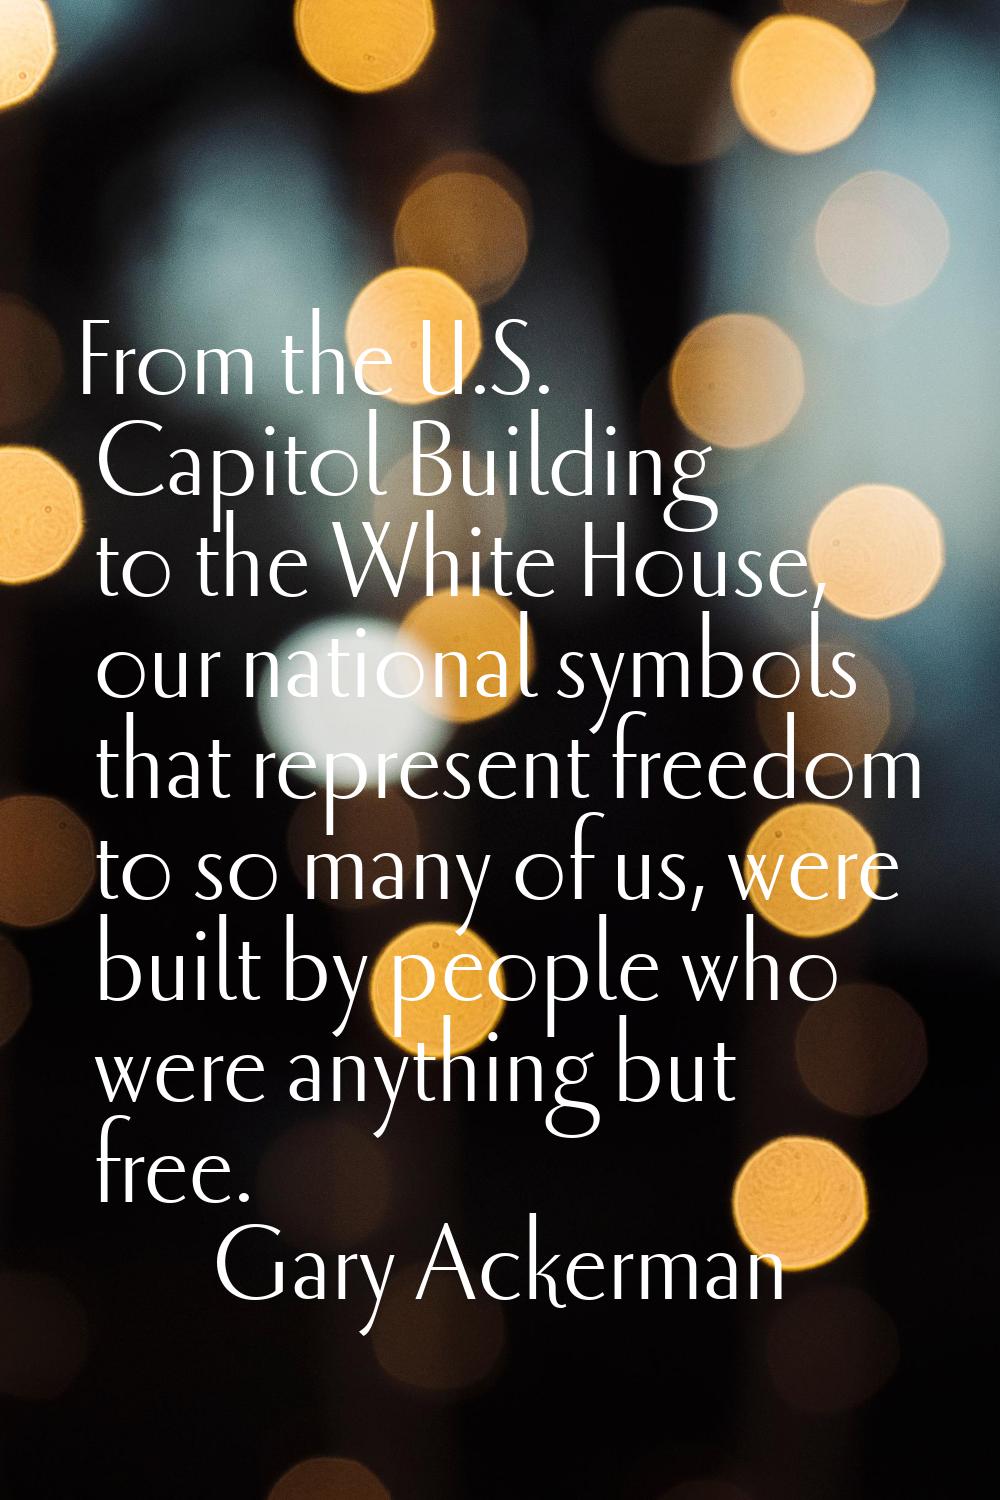 From the U.S. Capitol Building to the White House, our national symbols that represent freedom to s